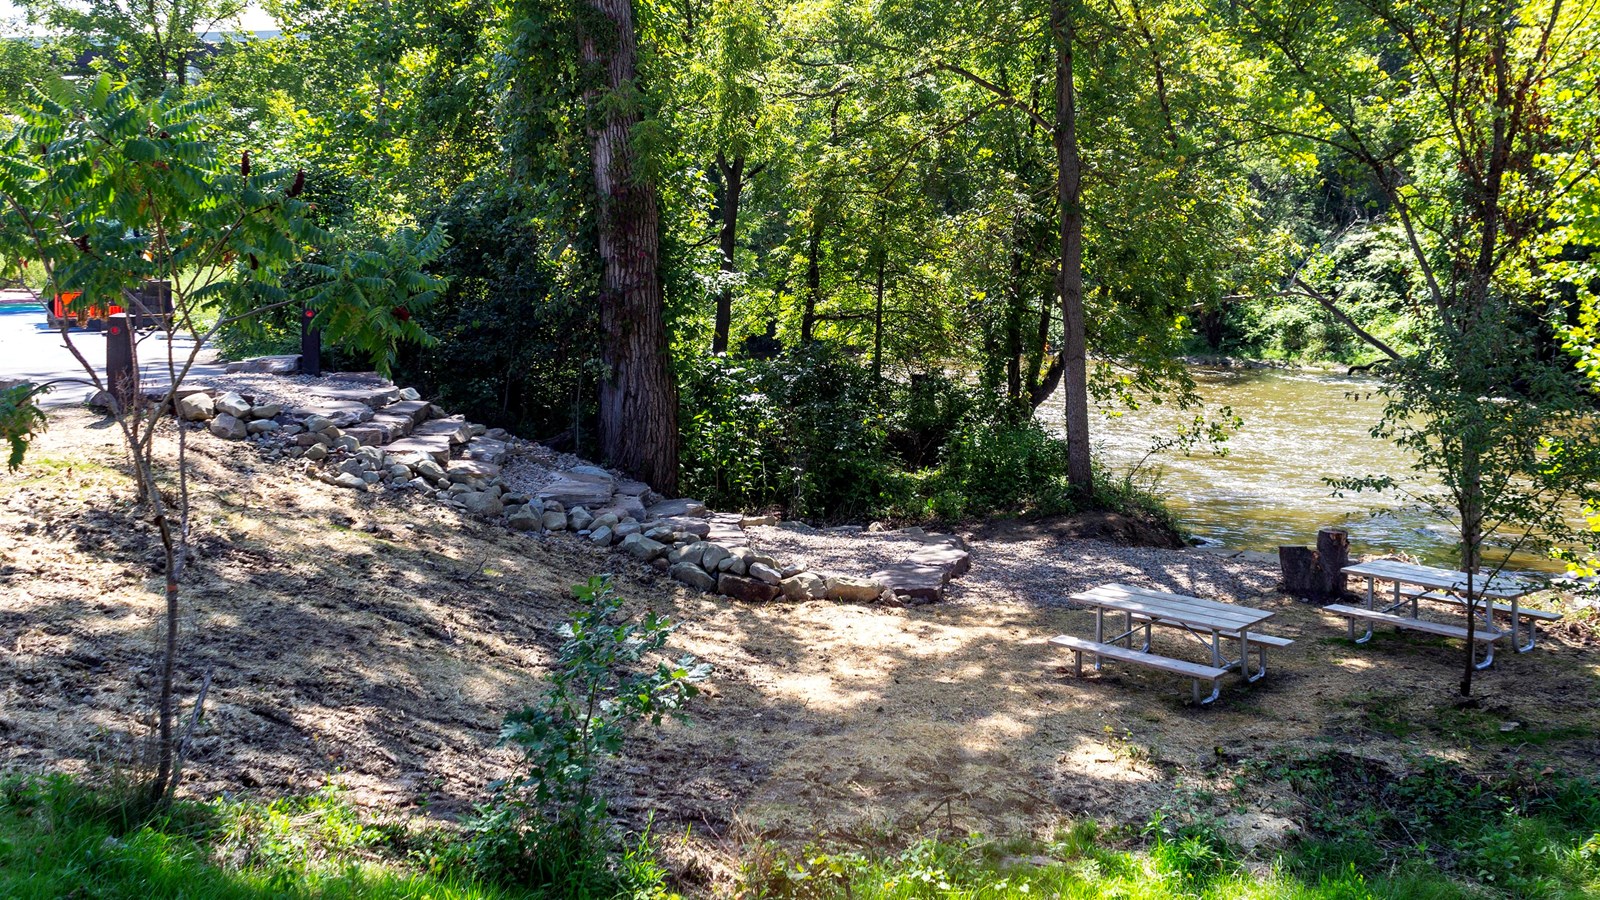 A stone staircase descends a wooded riverbank down to the water; two picnic tables to the right.